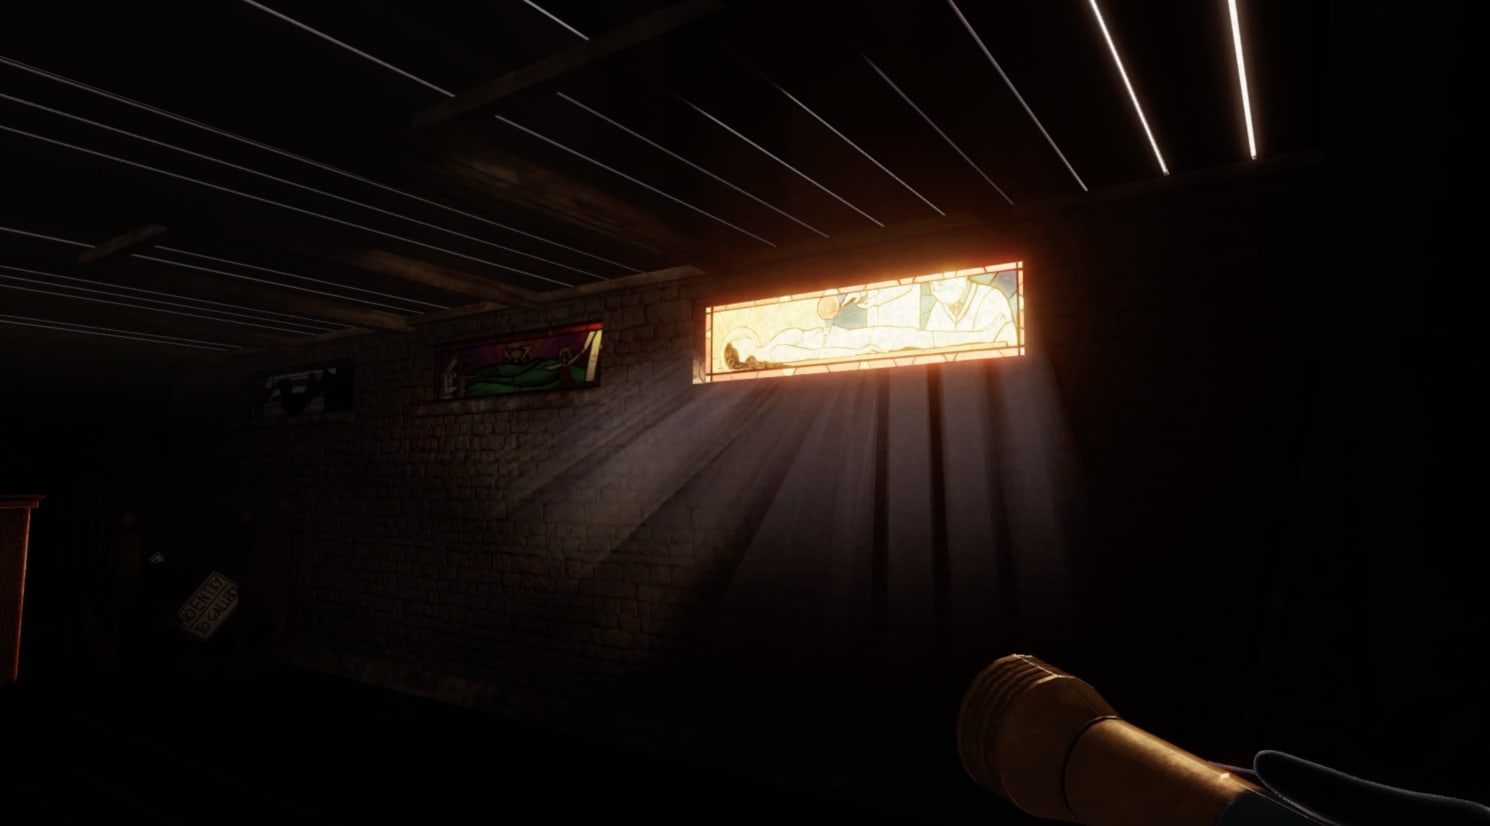  In-game screenshot focusing on a stained glass window through which beams of light stream, assumedly from a car outside. Perspective is limited by the reach of the torchlight, so little beyond the window is discernible, but the exterior light source illuminates the design of the stained glass. A naked female figure lies flat on an operating table while a second figure, clad in surgical attire, appears to operate on her.